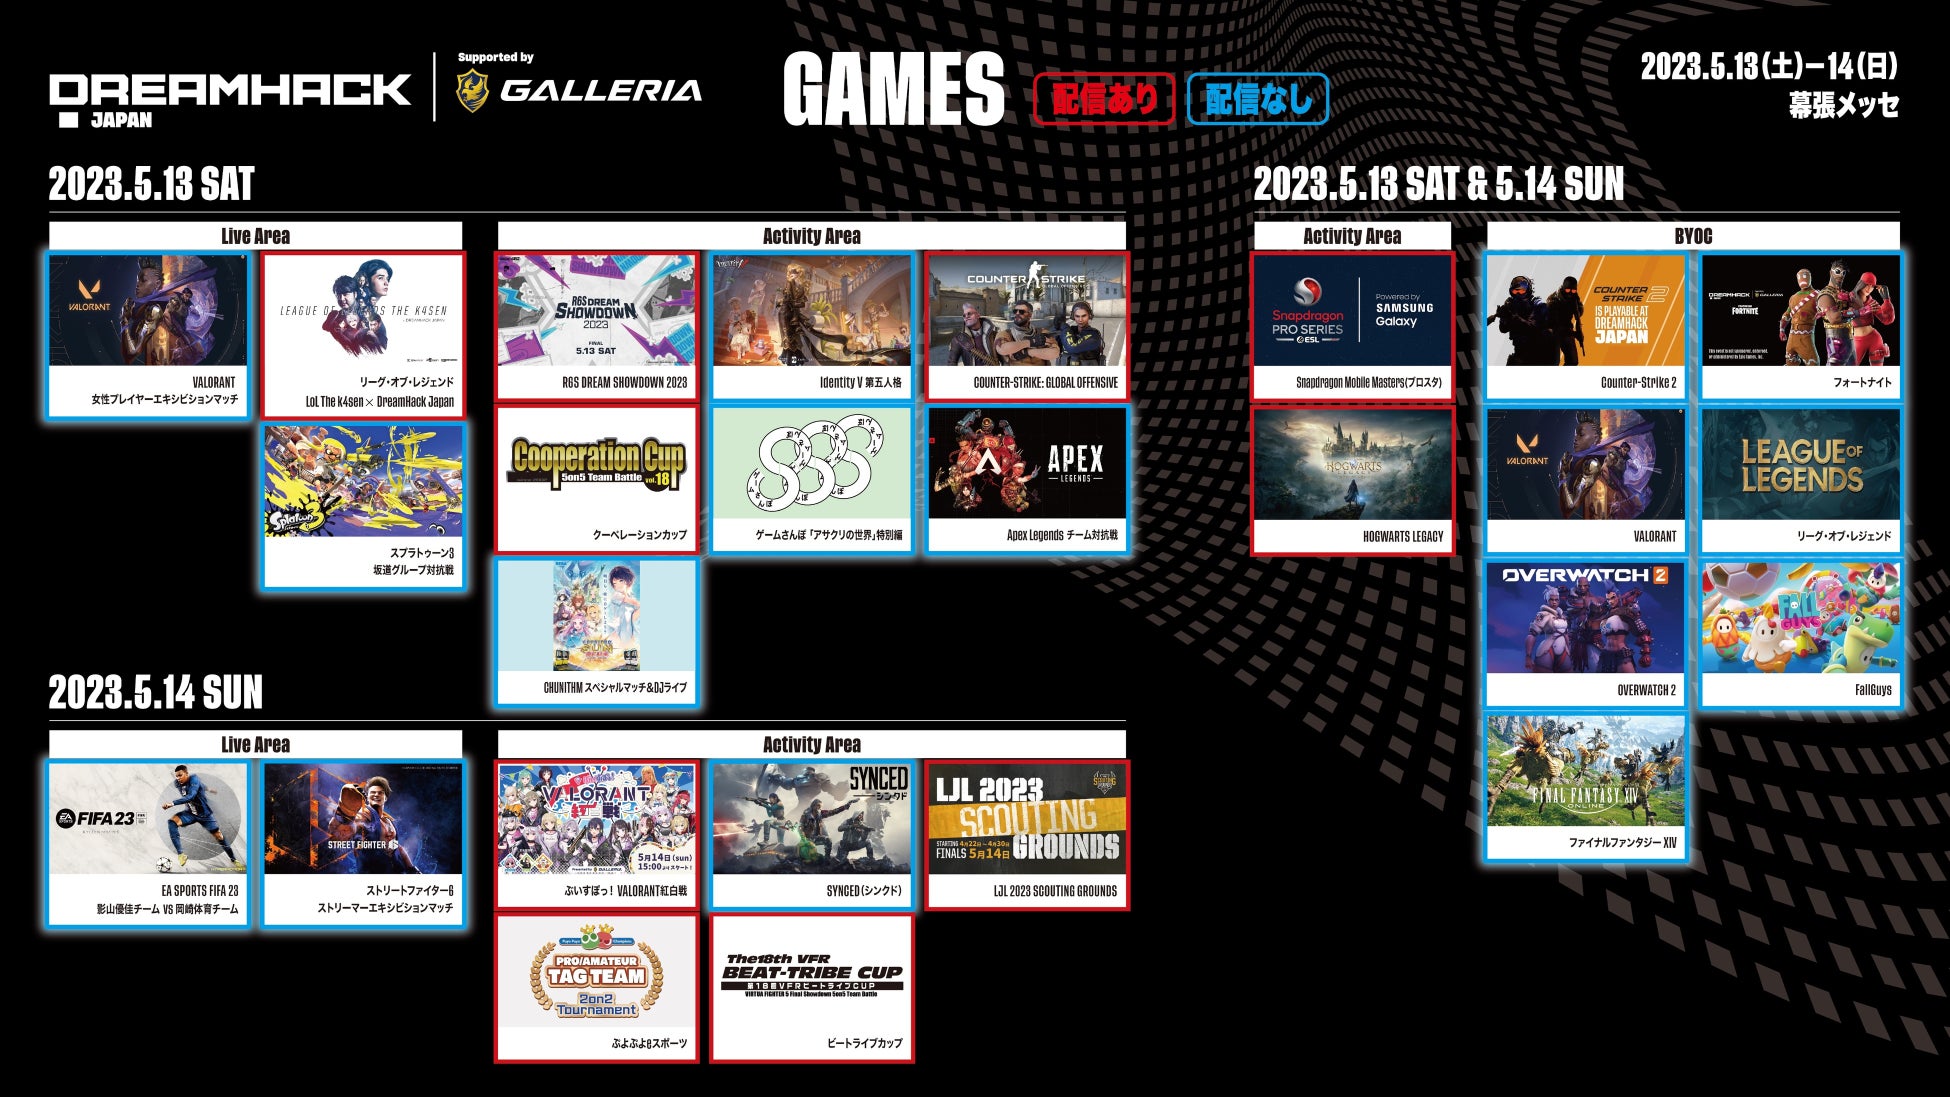 「DreamHack Japan 2023 Supported by GALLERIA」ゲームタイトル  第10弾追加発表！